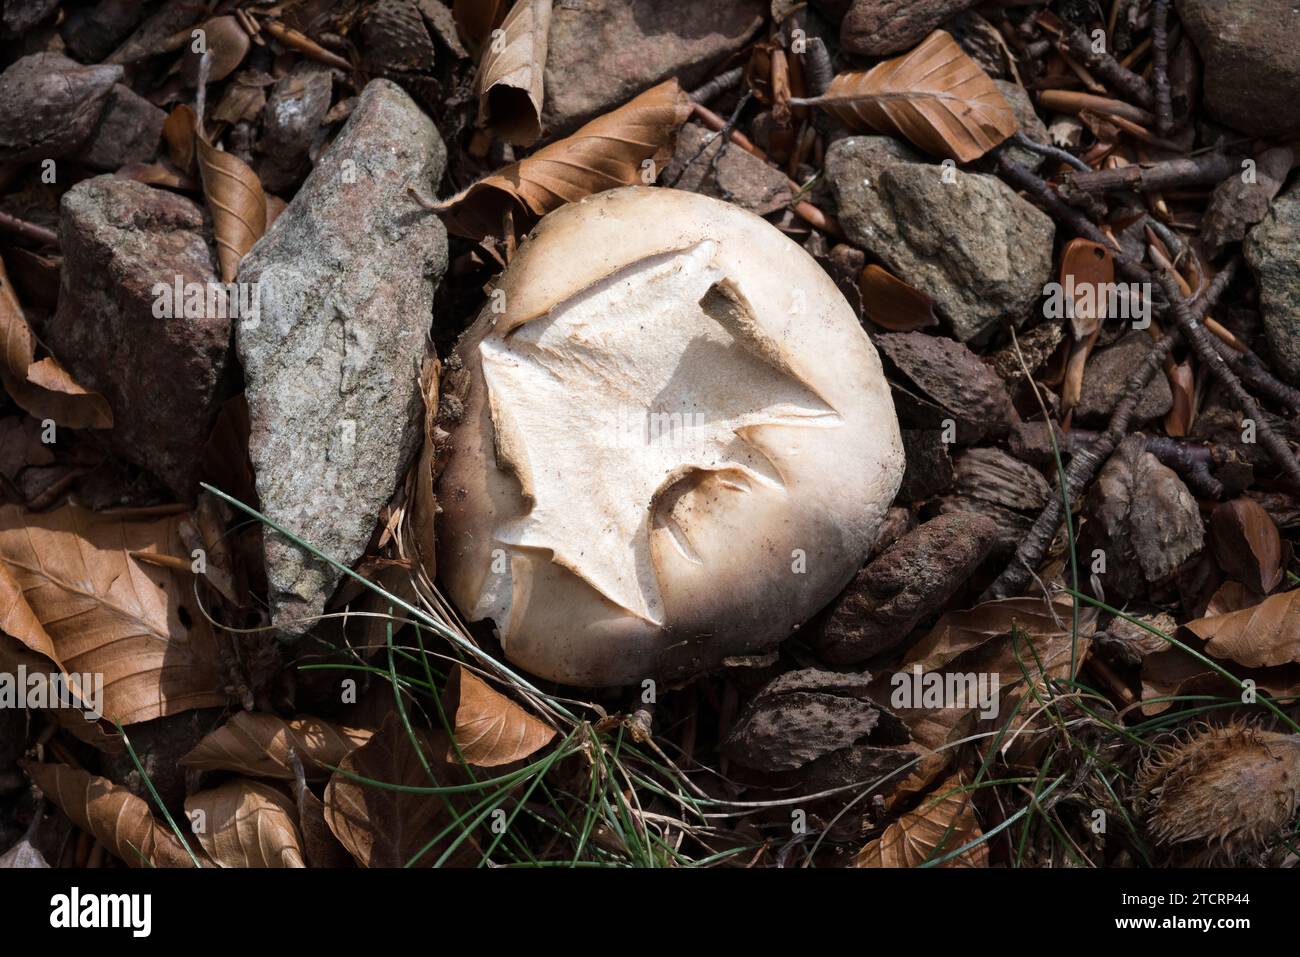 Paltry puffball (Bovista plumbea) is a mushroom that grows in meadows. This photo was taken in Montseny Biosphere Reserve, Barcelona province, Catalon Stock Photo